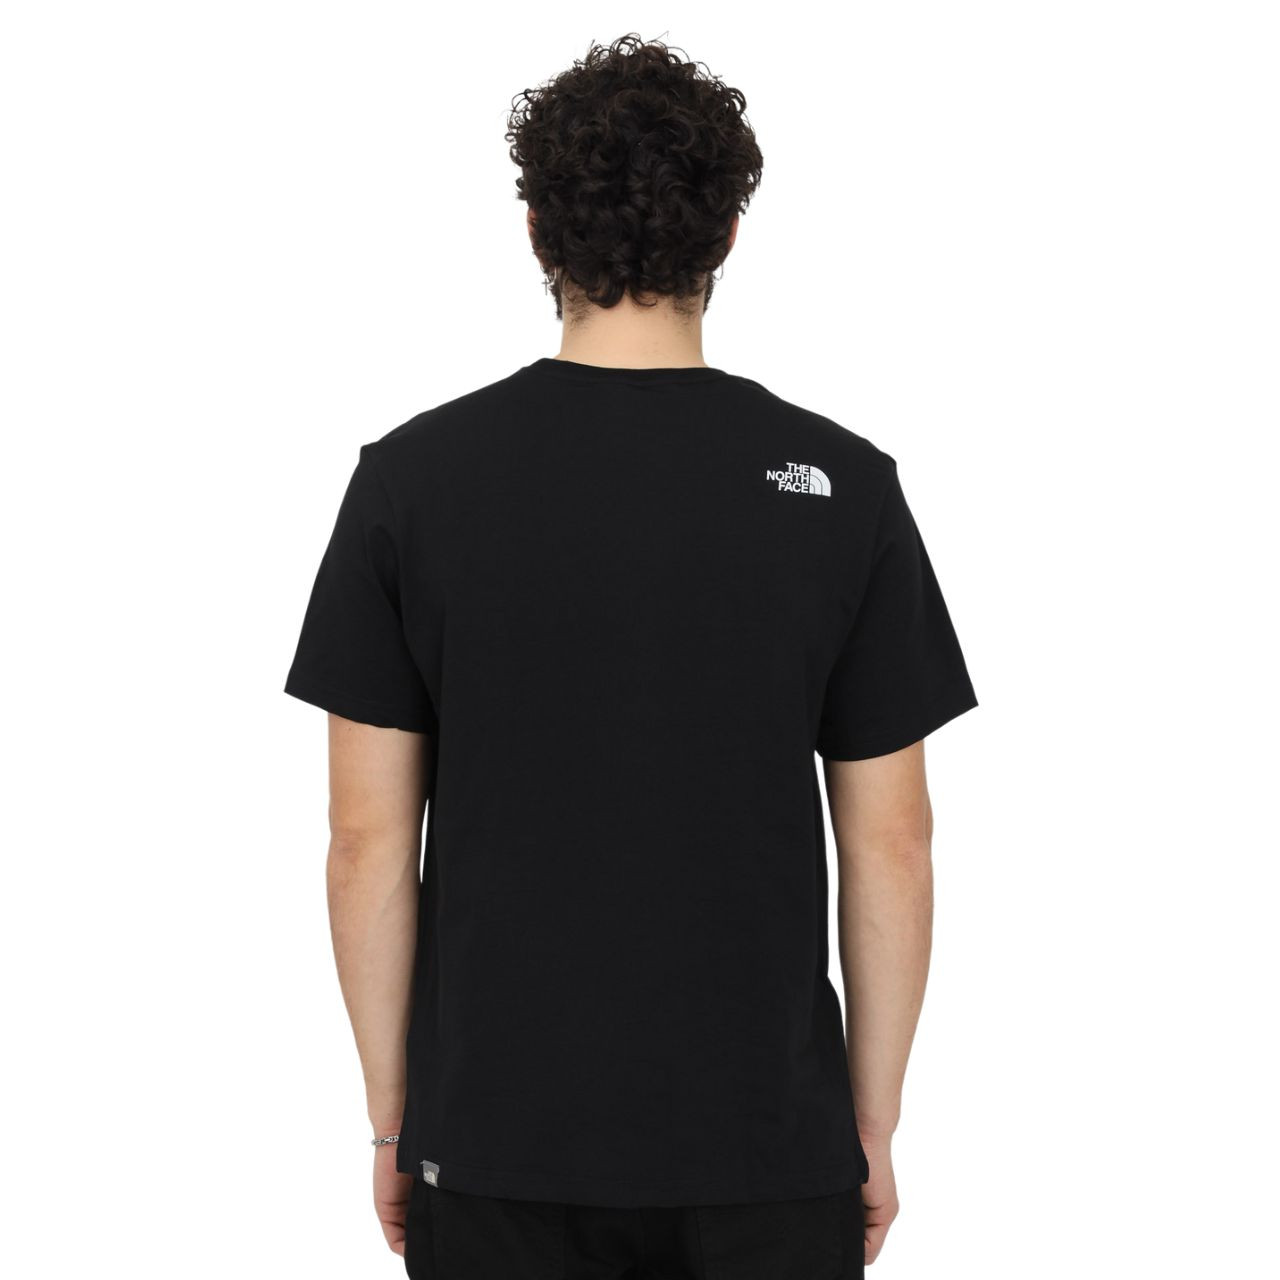 Футболка The North Face S/S Easy Tee NF0A2TX3JK31 NF0A2TX3JK31